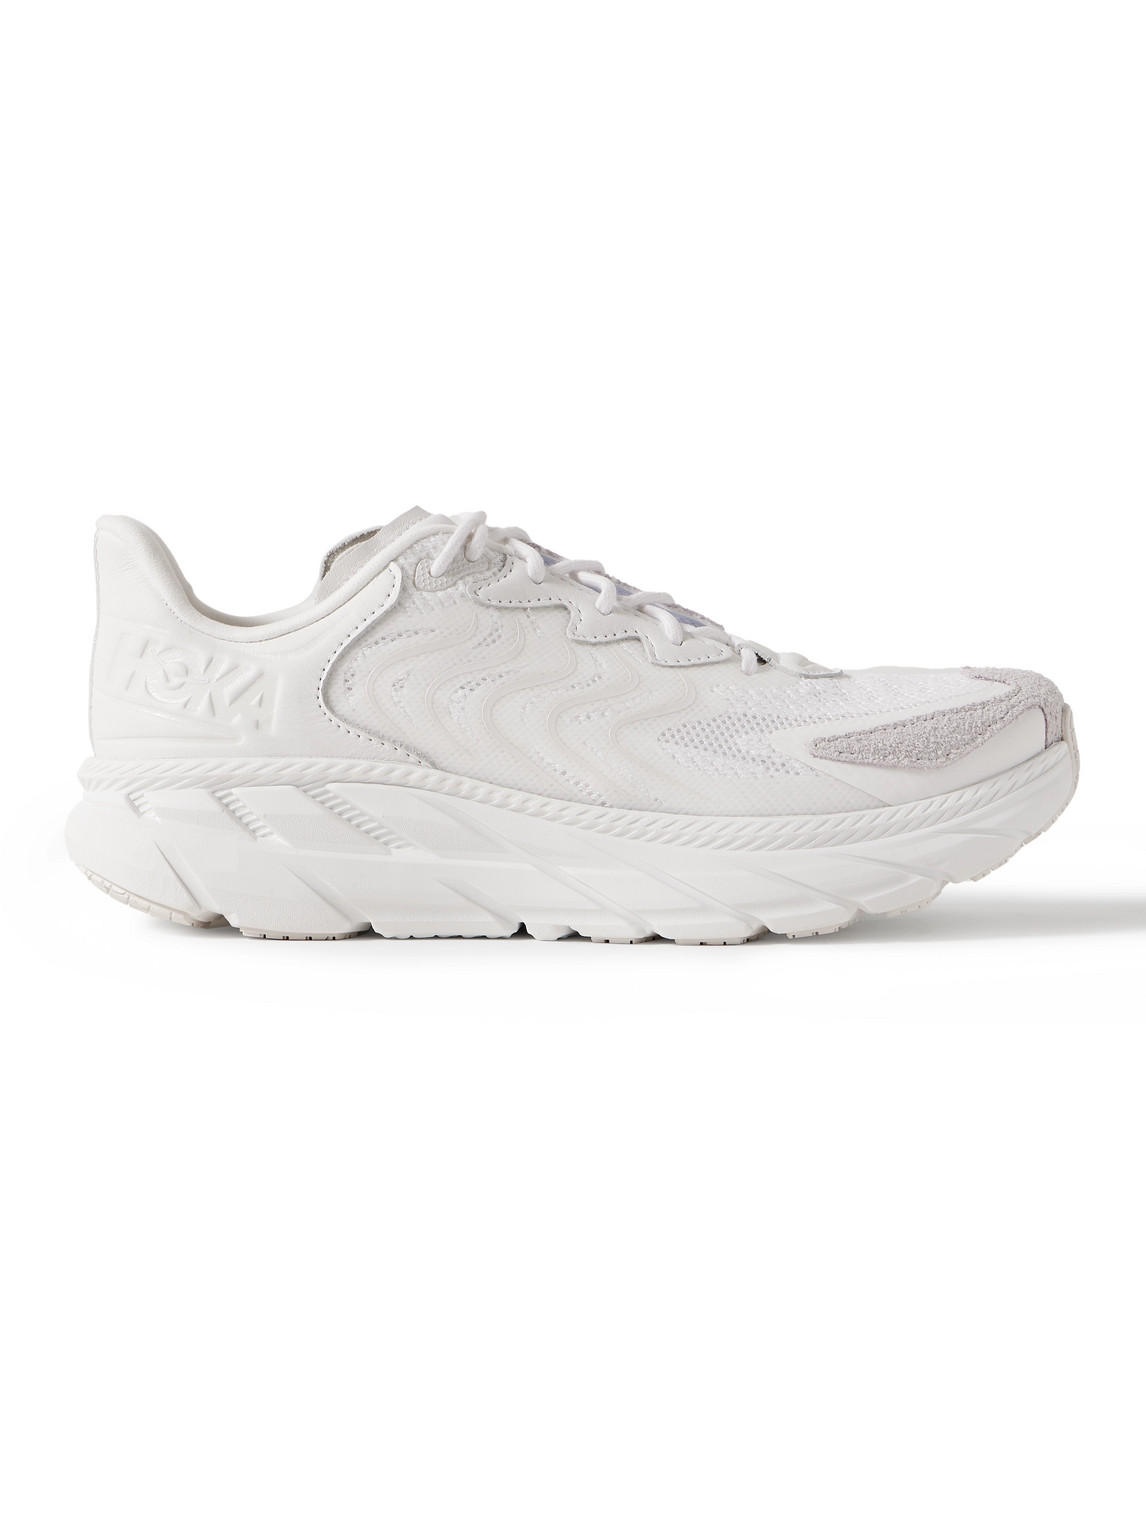 Hoka One One - Clifton LS Rubber-Trimmed Mesh, Leather and Suede Running Sneakers - Men - White - US 7 von Hoka One One